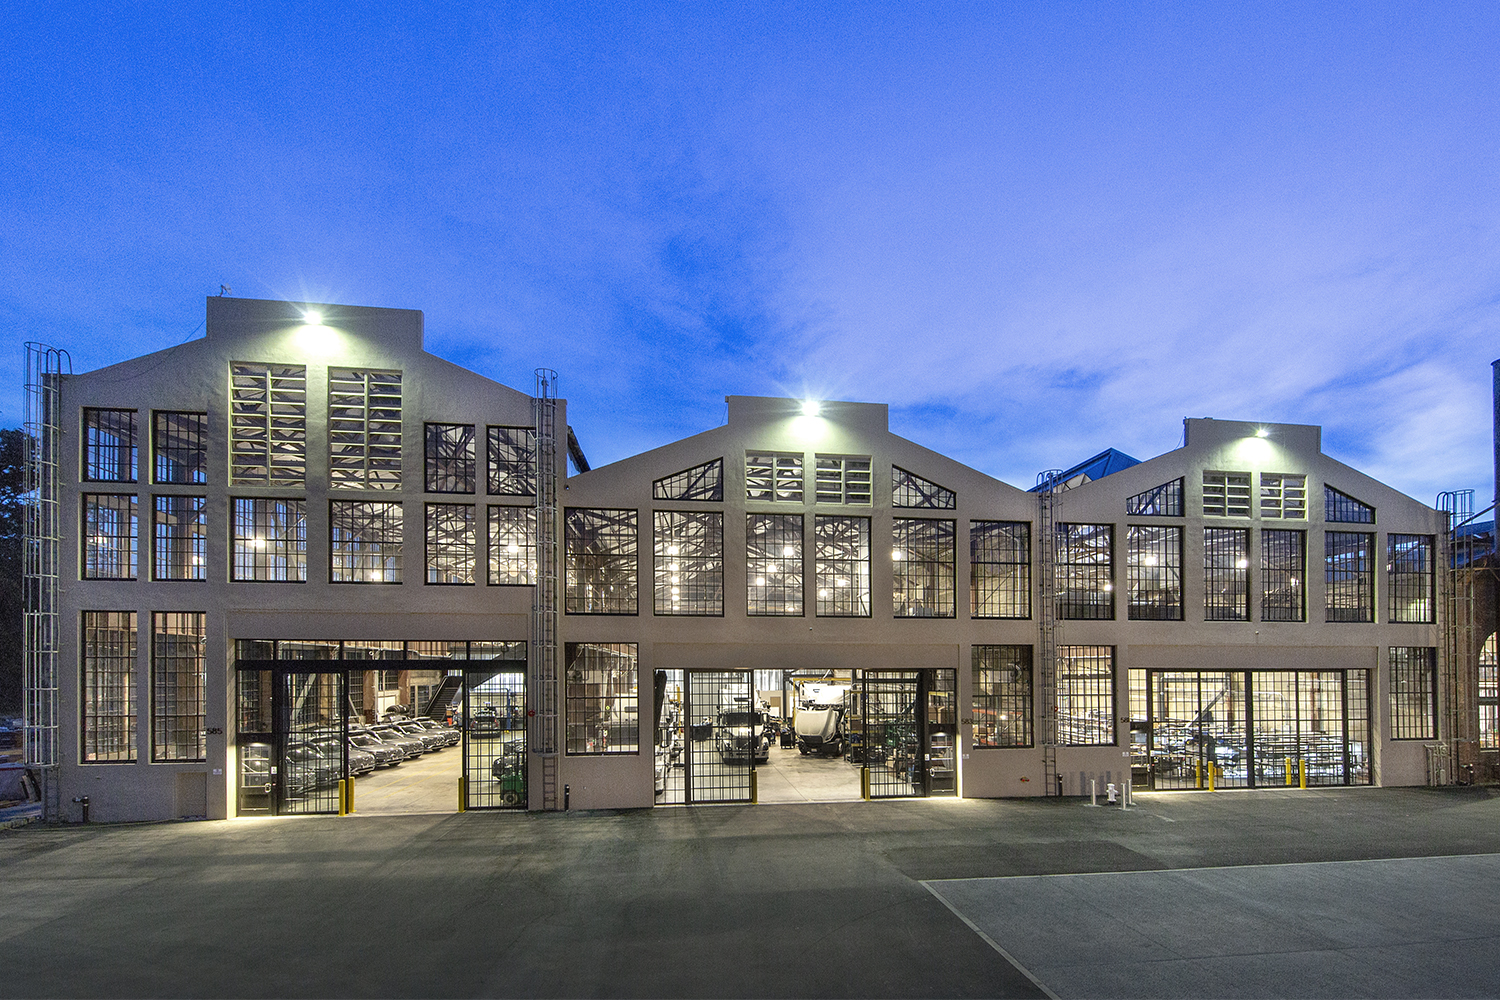 03_Projects_Adaptive Reuse of Historic Pier 70.jpg